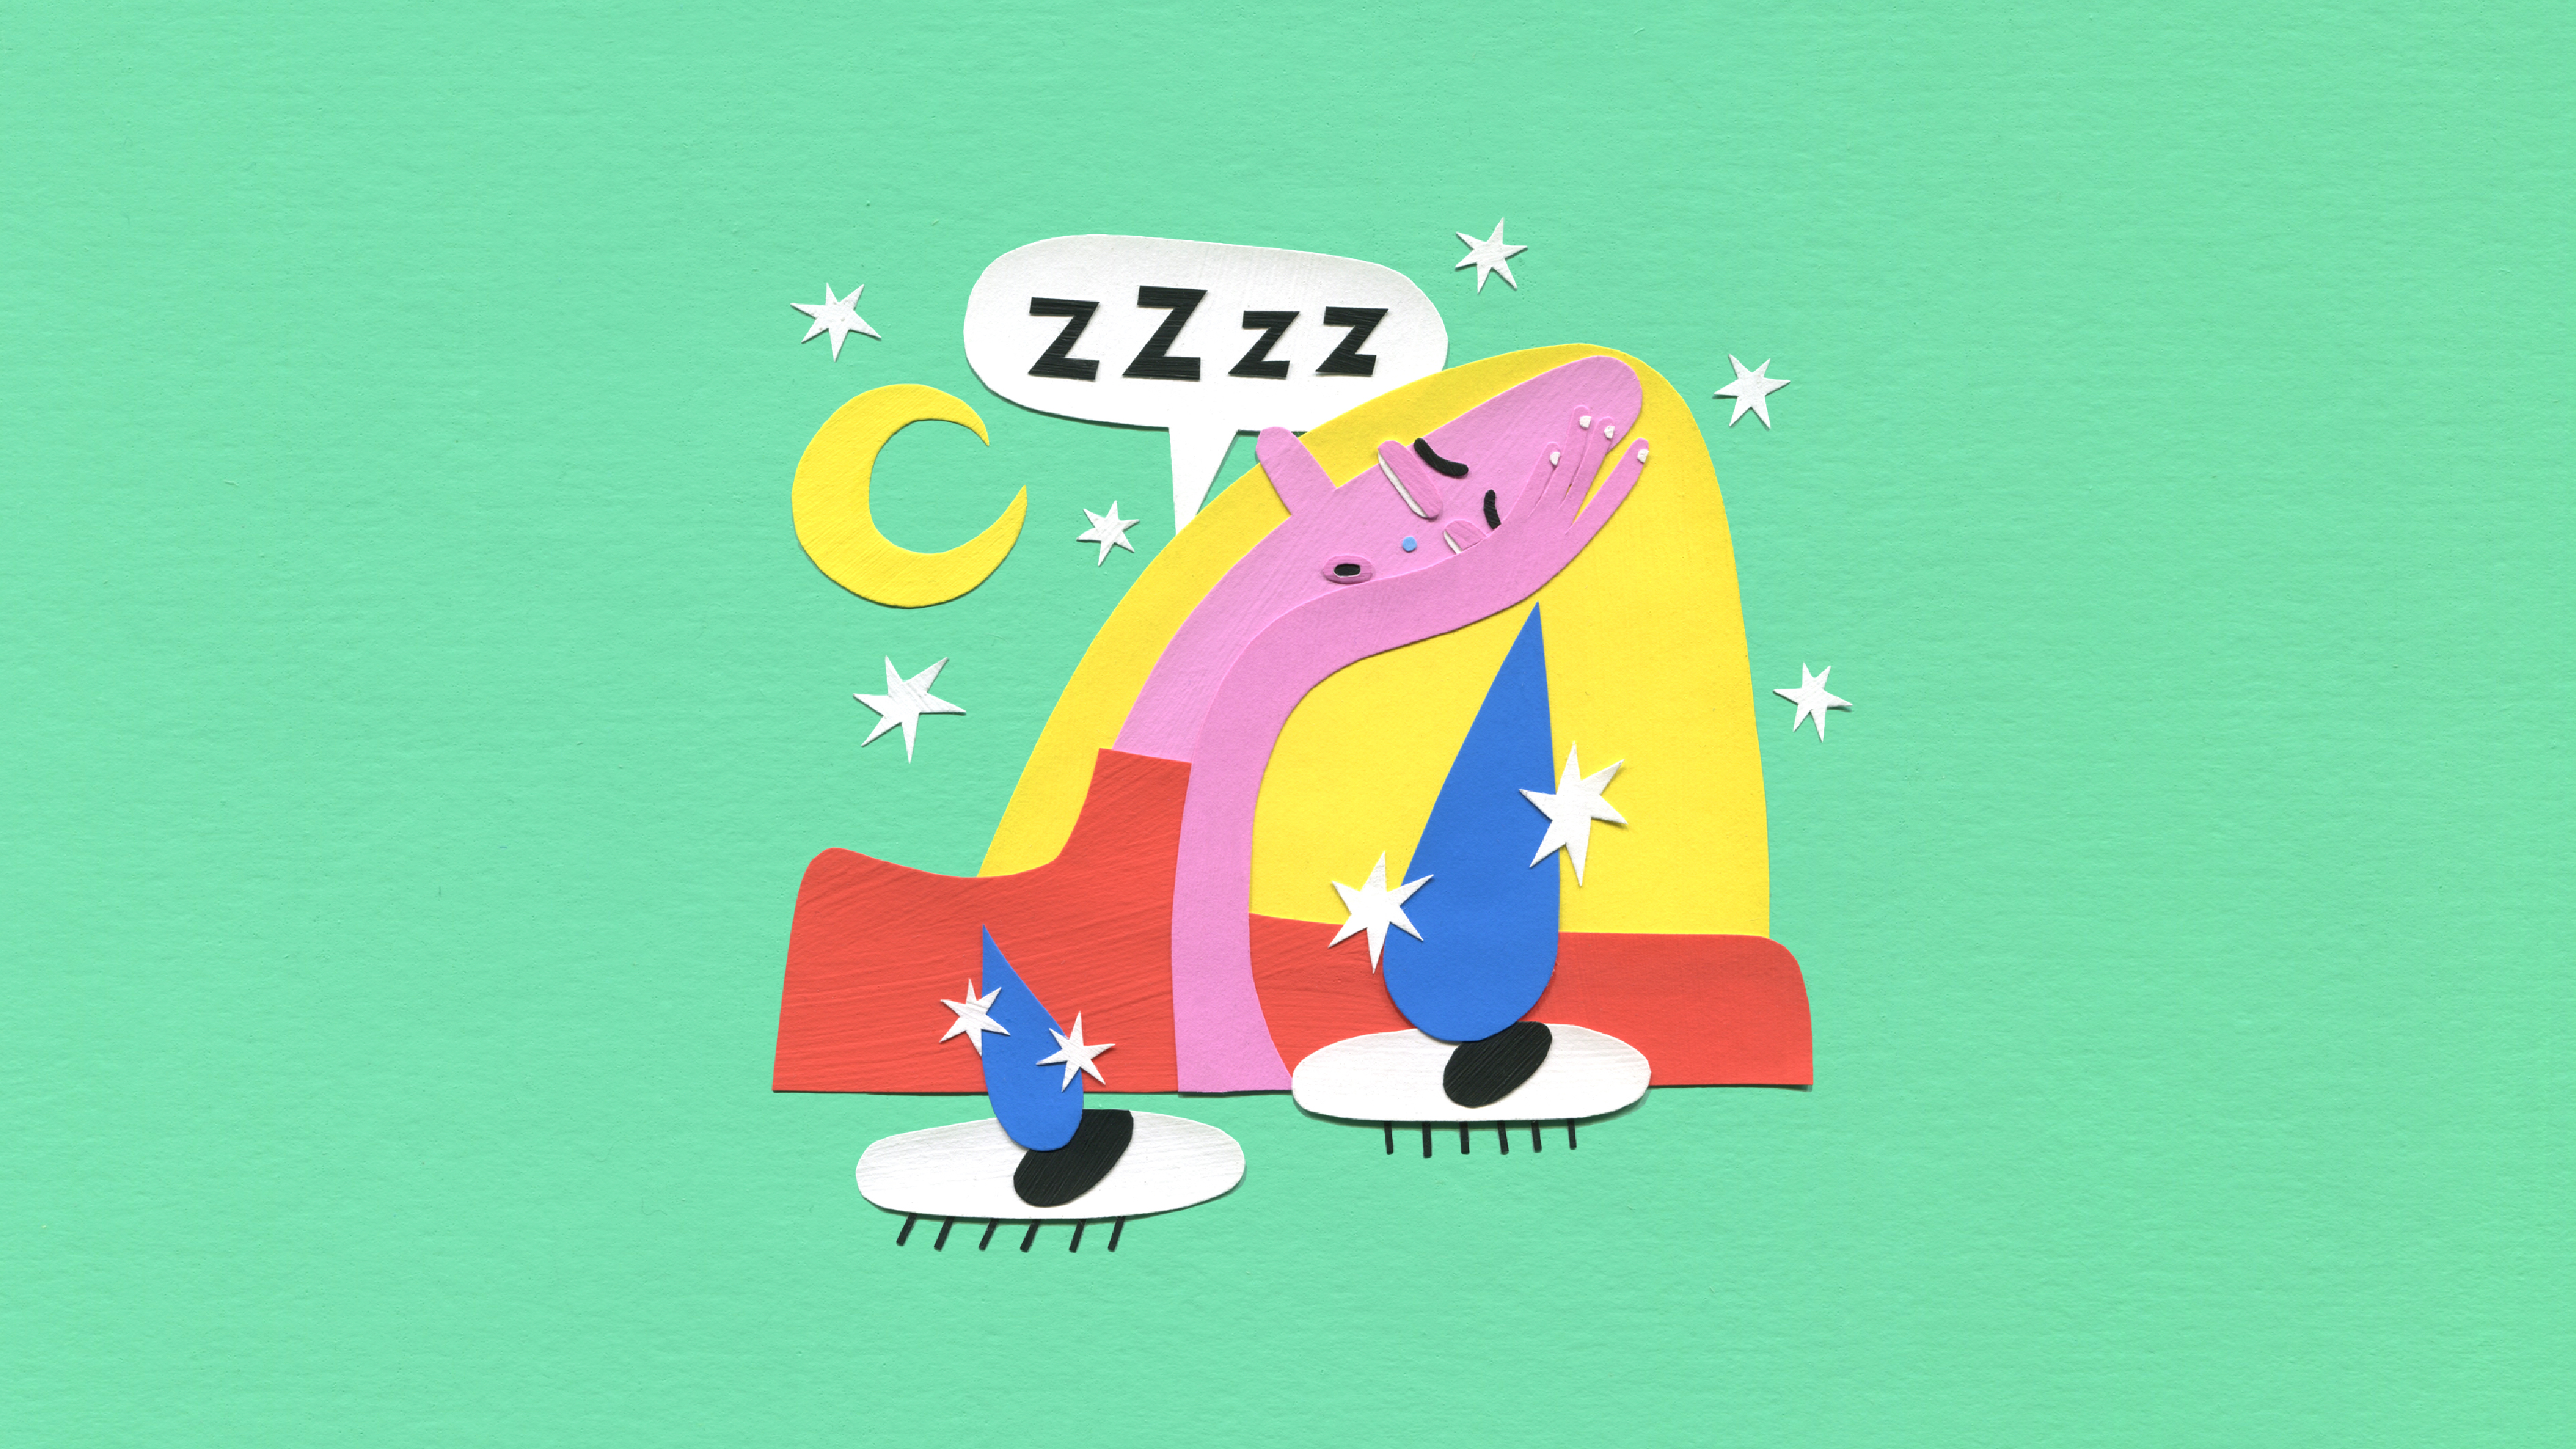 A colourful drawing of a person sleeping, with drops falling into a pair of eyes below the person.